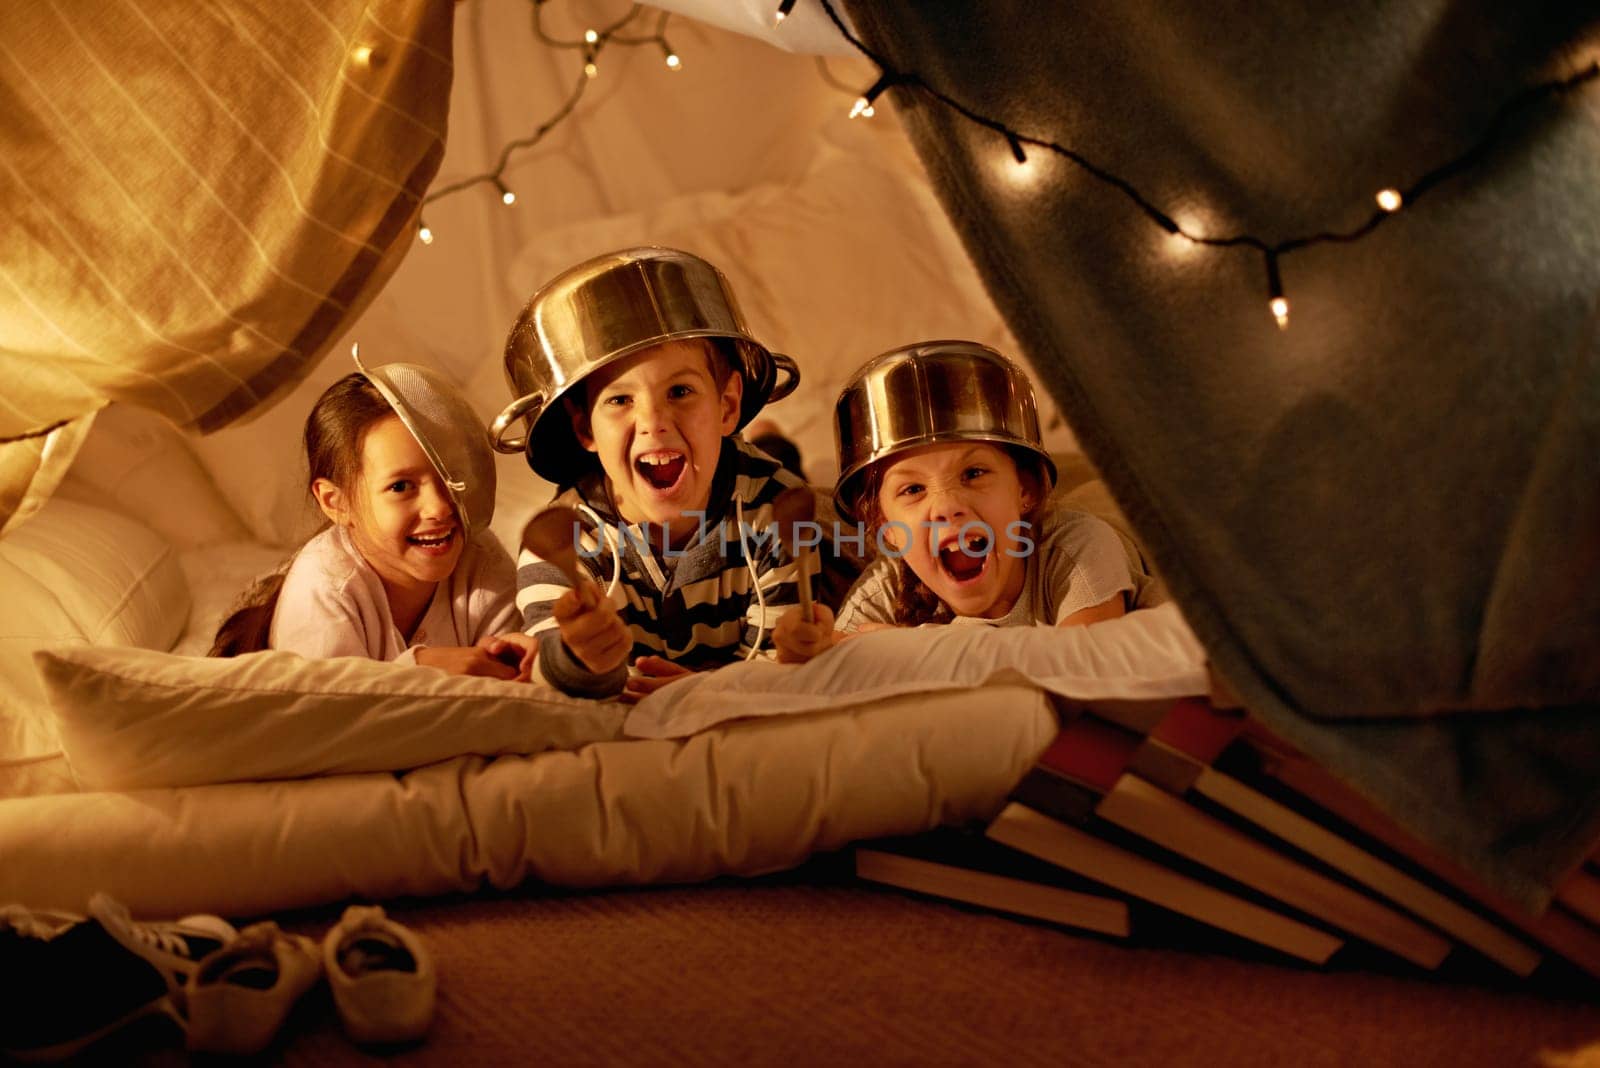 Tent, lights and portrait of children at night in bedroom for playing, fun and bonding at home. Friends, youth and happy kids with spoon, helmet pots and blanket fort for games, relax and childhood by YuriArcurs